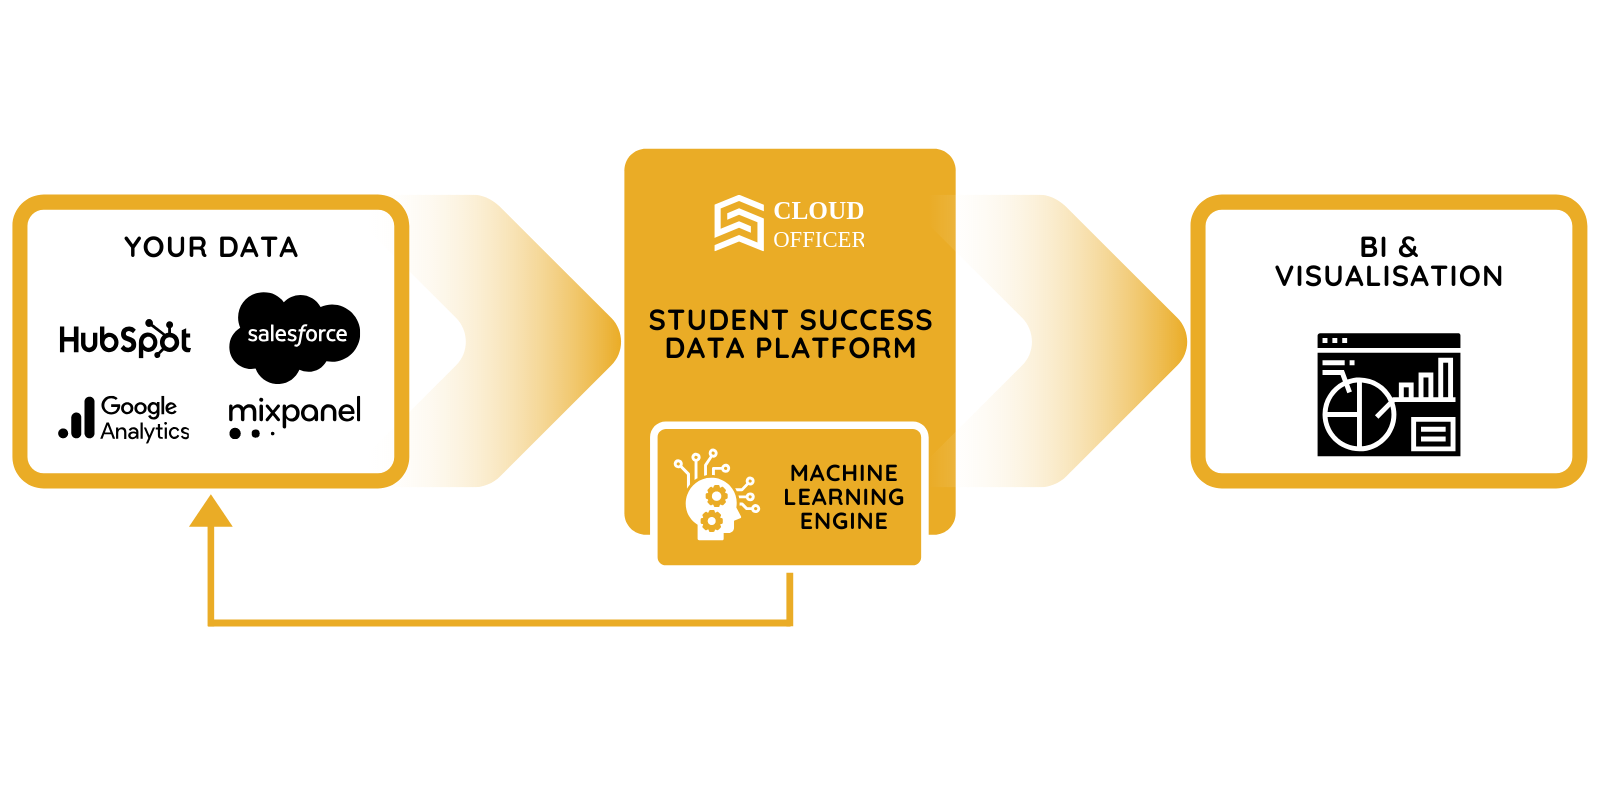 diagram of the cloud officer student success data platform for student recruitment